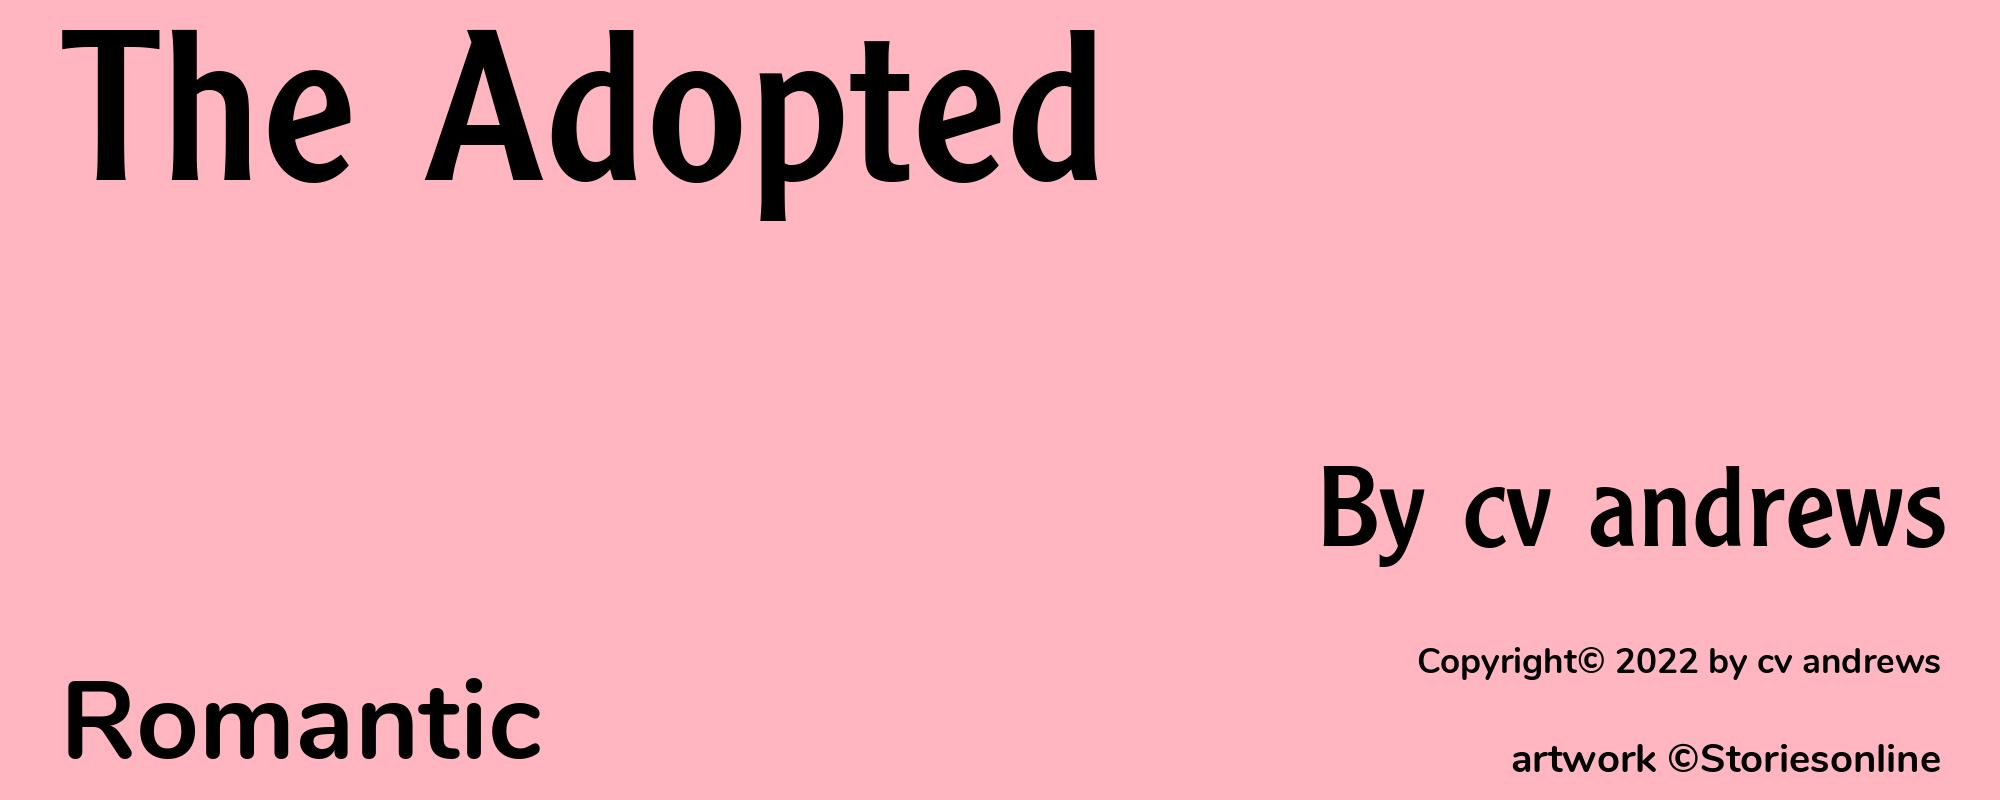 The Adopted - Cover